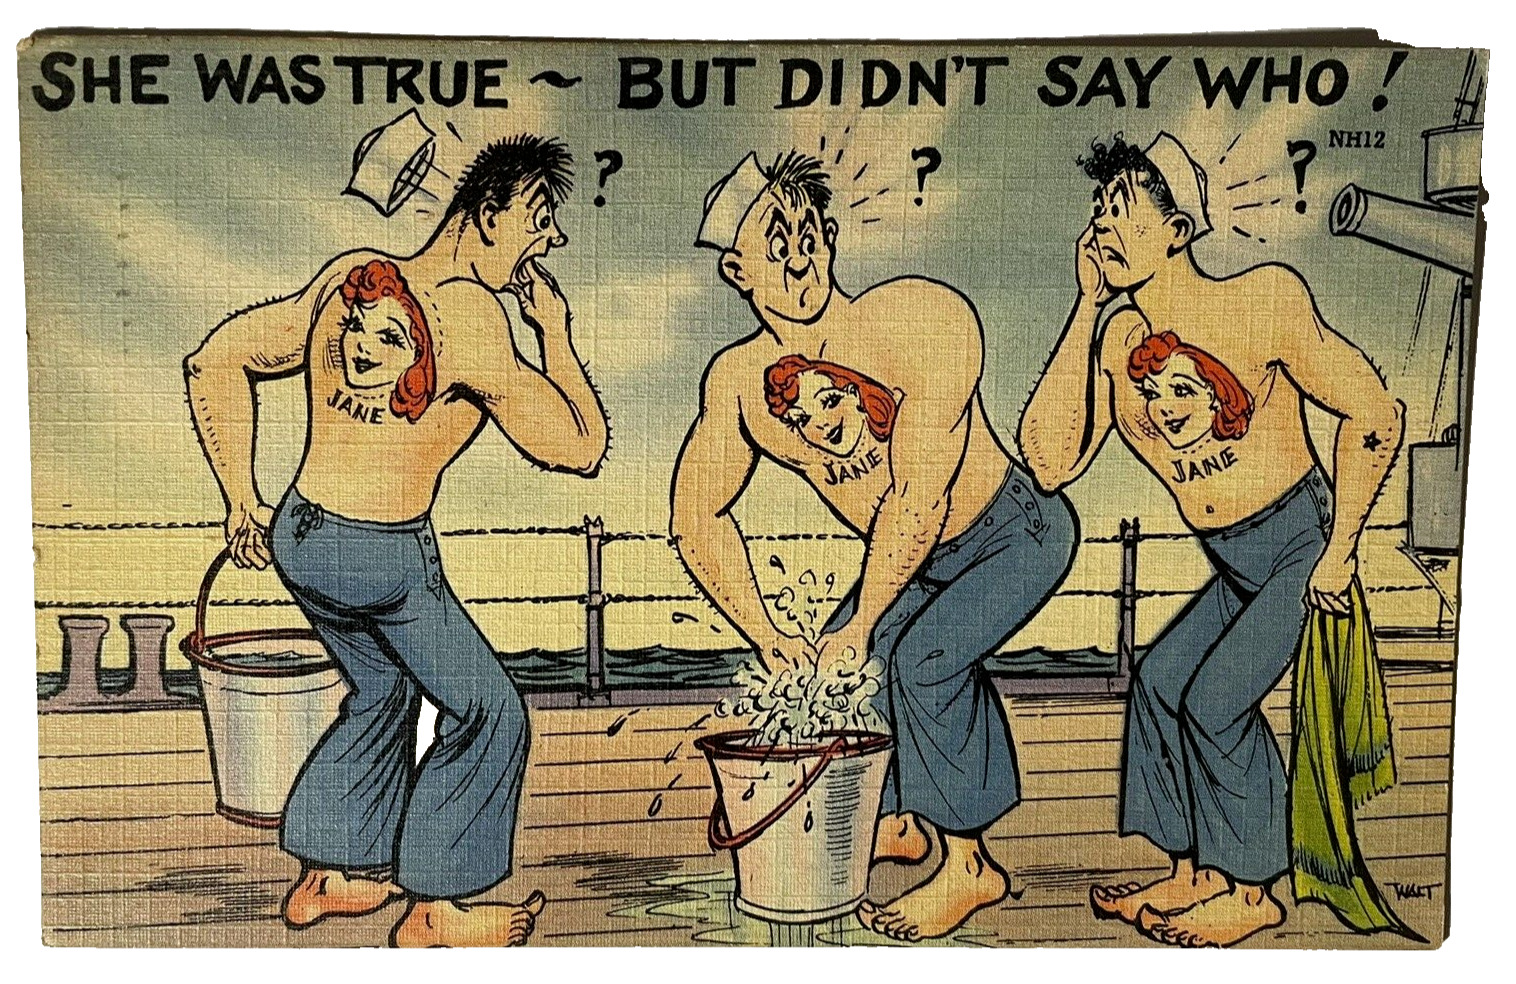 1943 Linen Humor Postcard US NAVY True Didn't Say Who Jane WWII NH12 Card